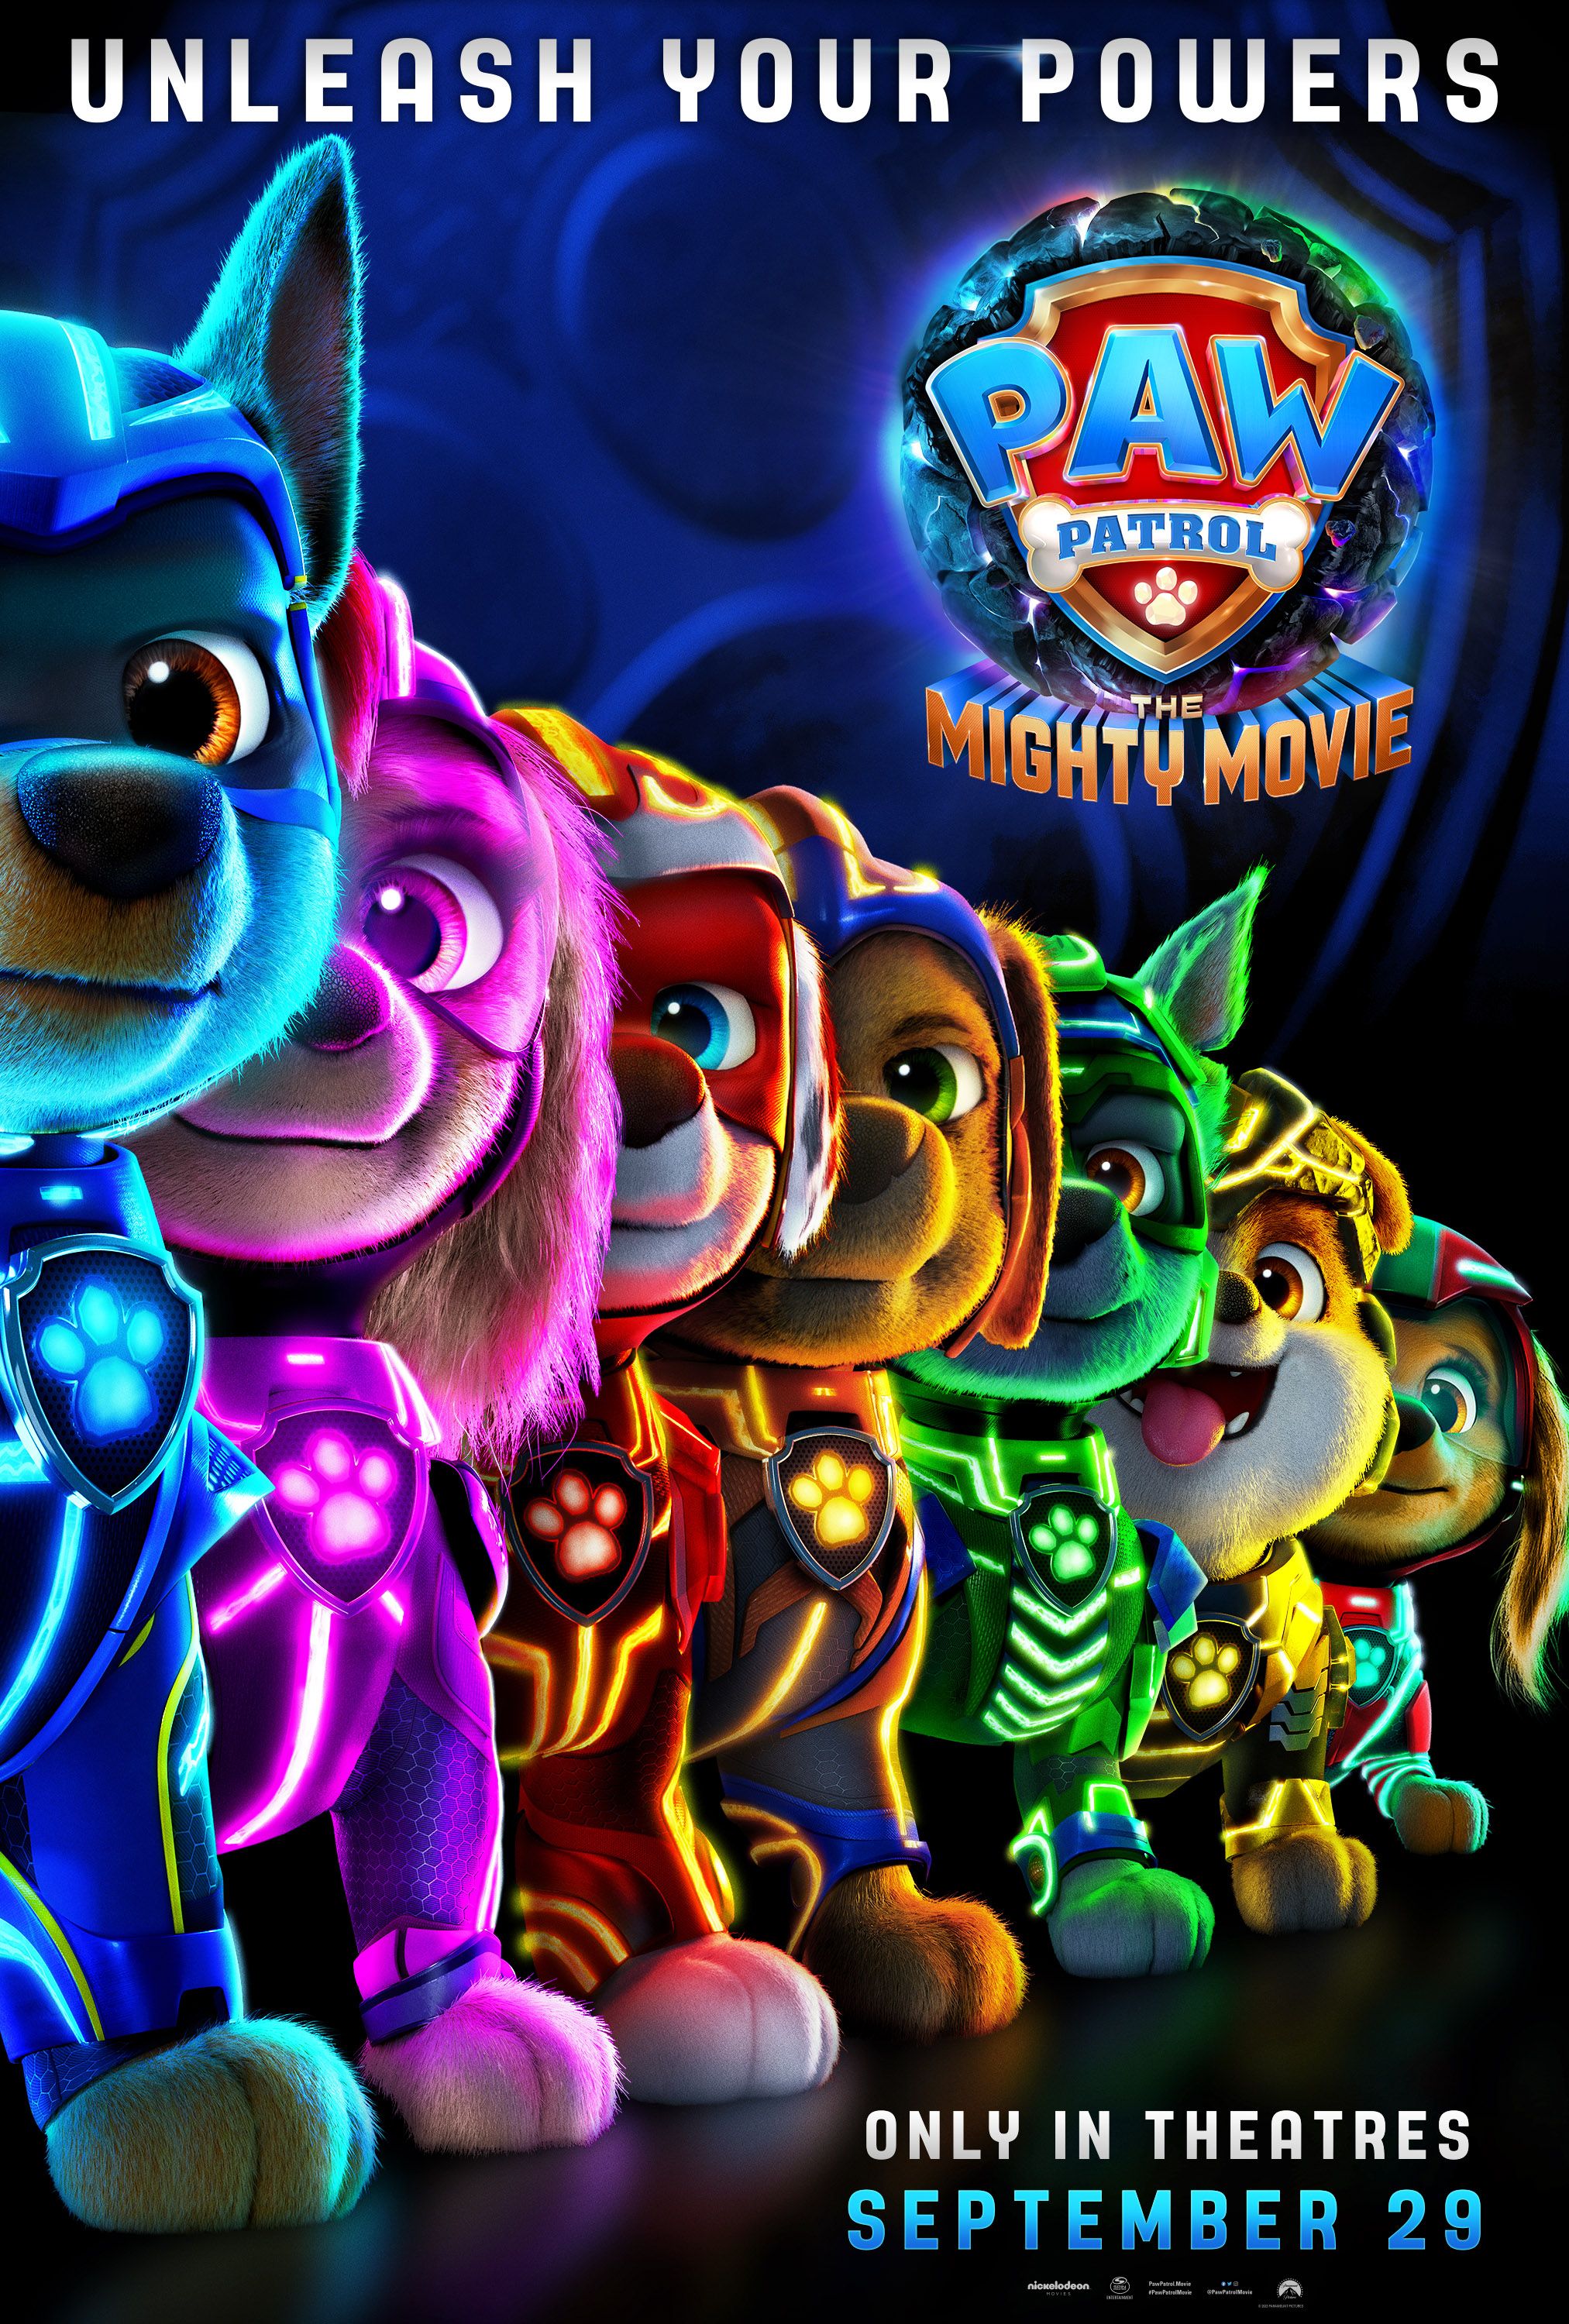 PAW Patrol: The Mighty Movie Trailer Turns the Pups Into Superheroes